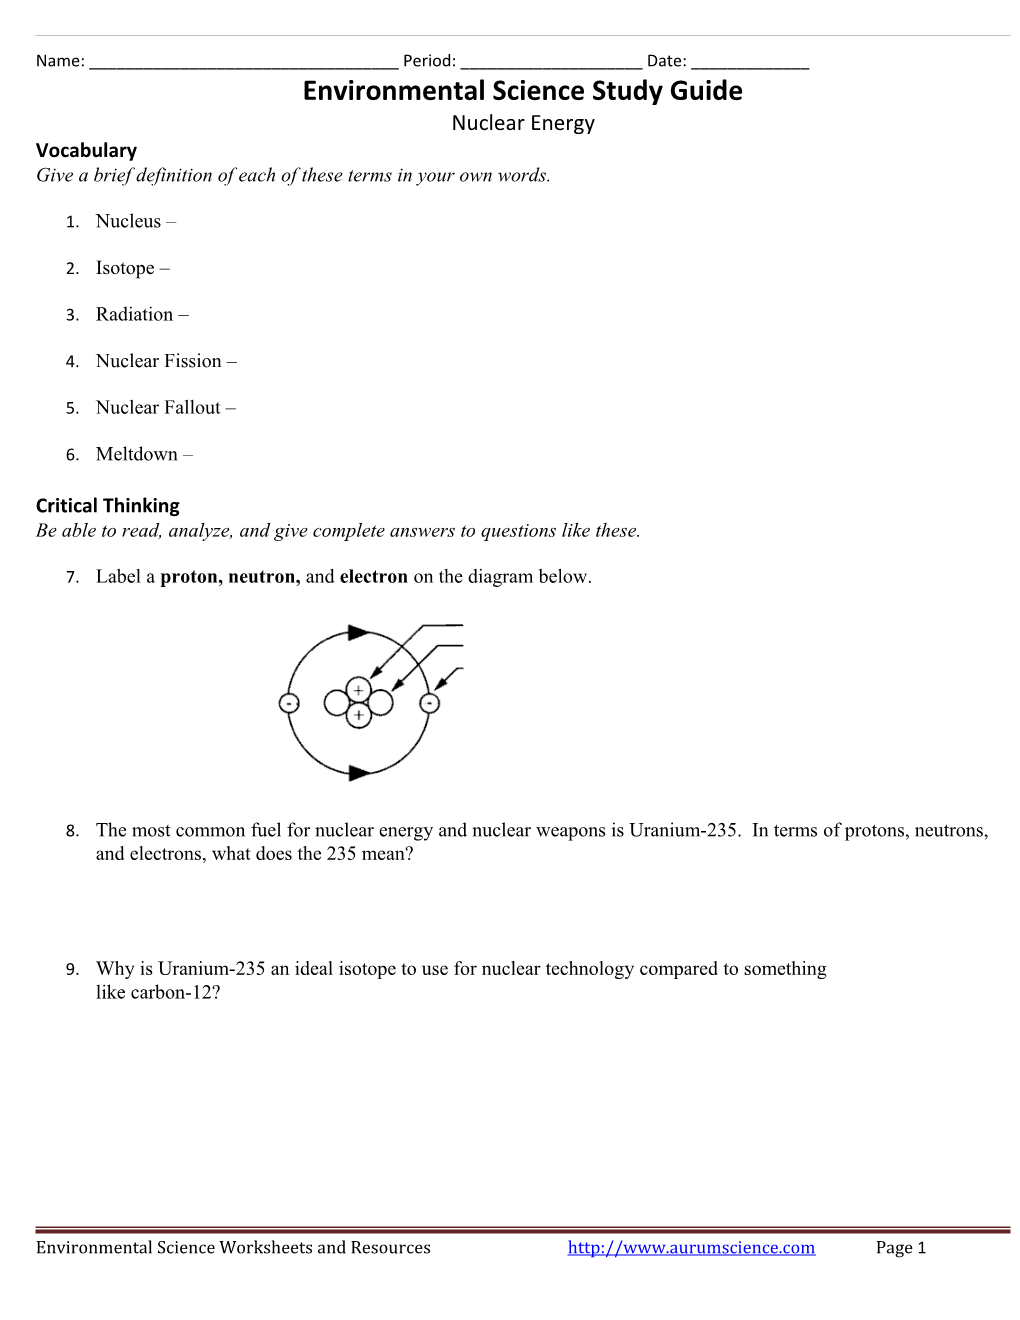 Environmental Science Study Guide s1